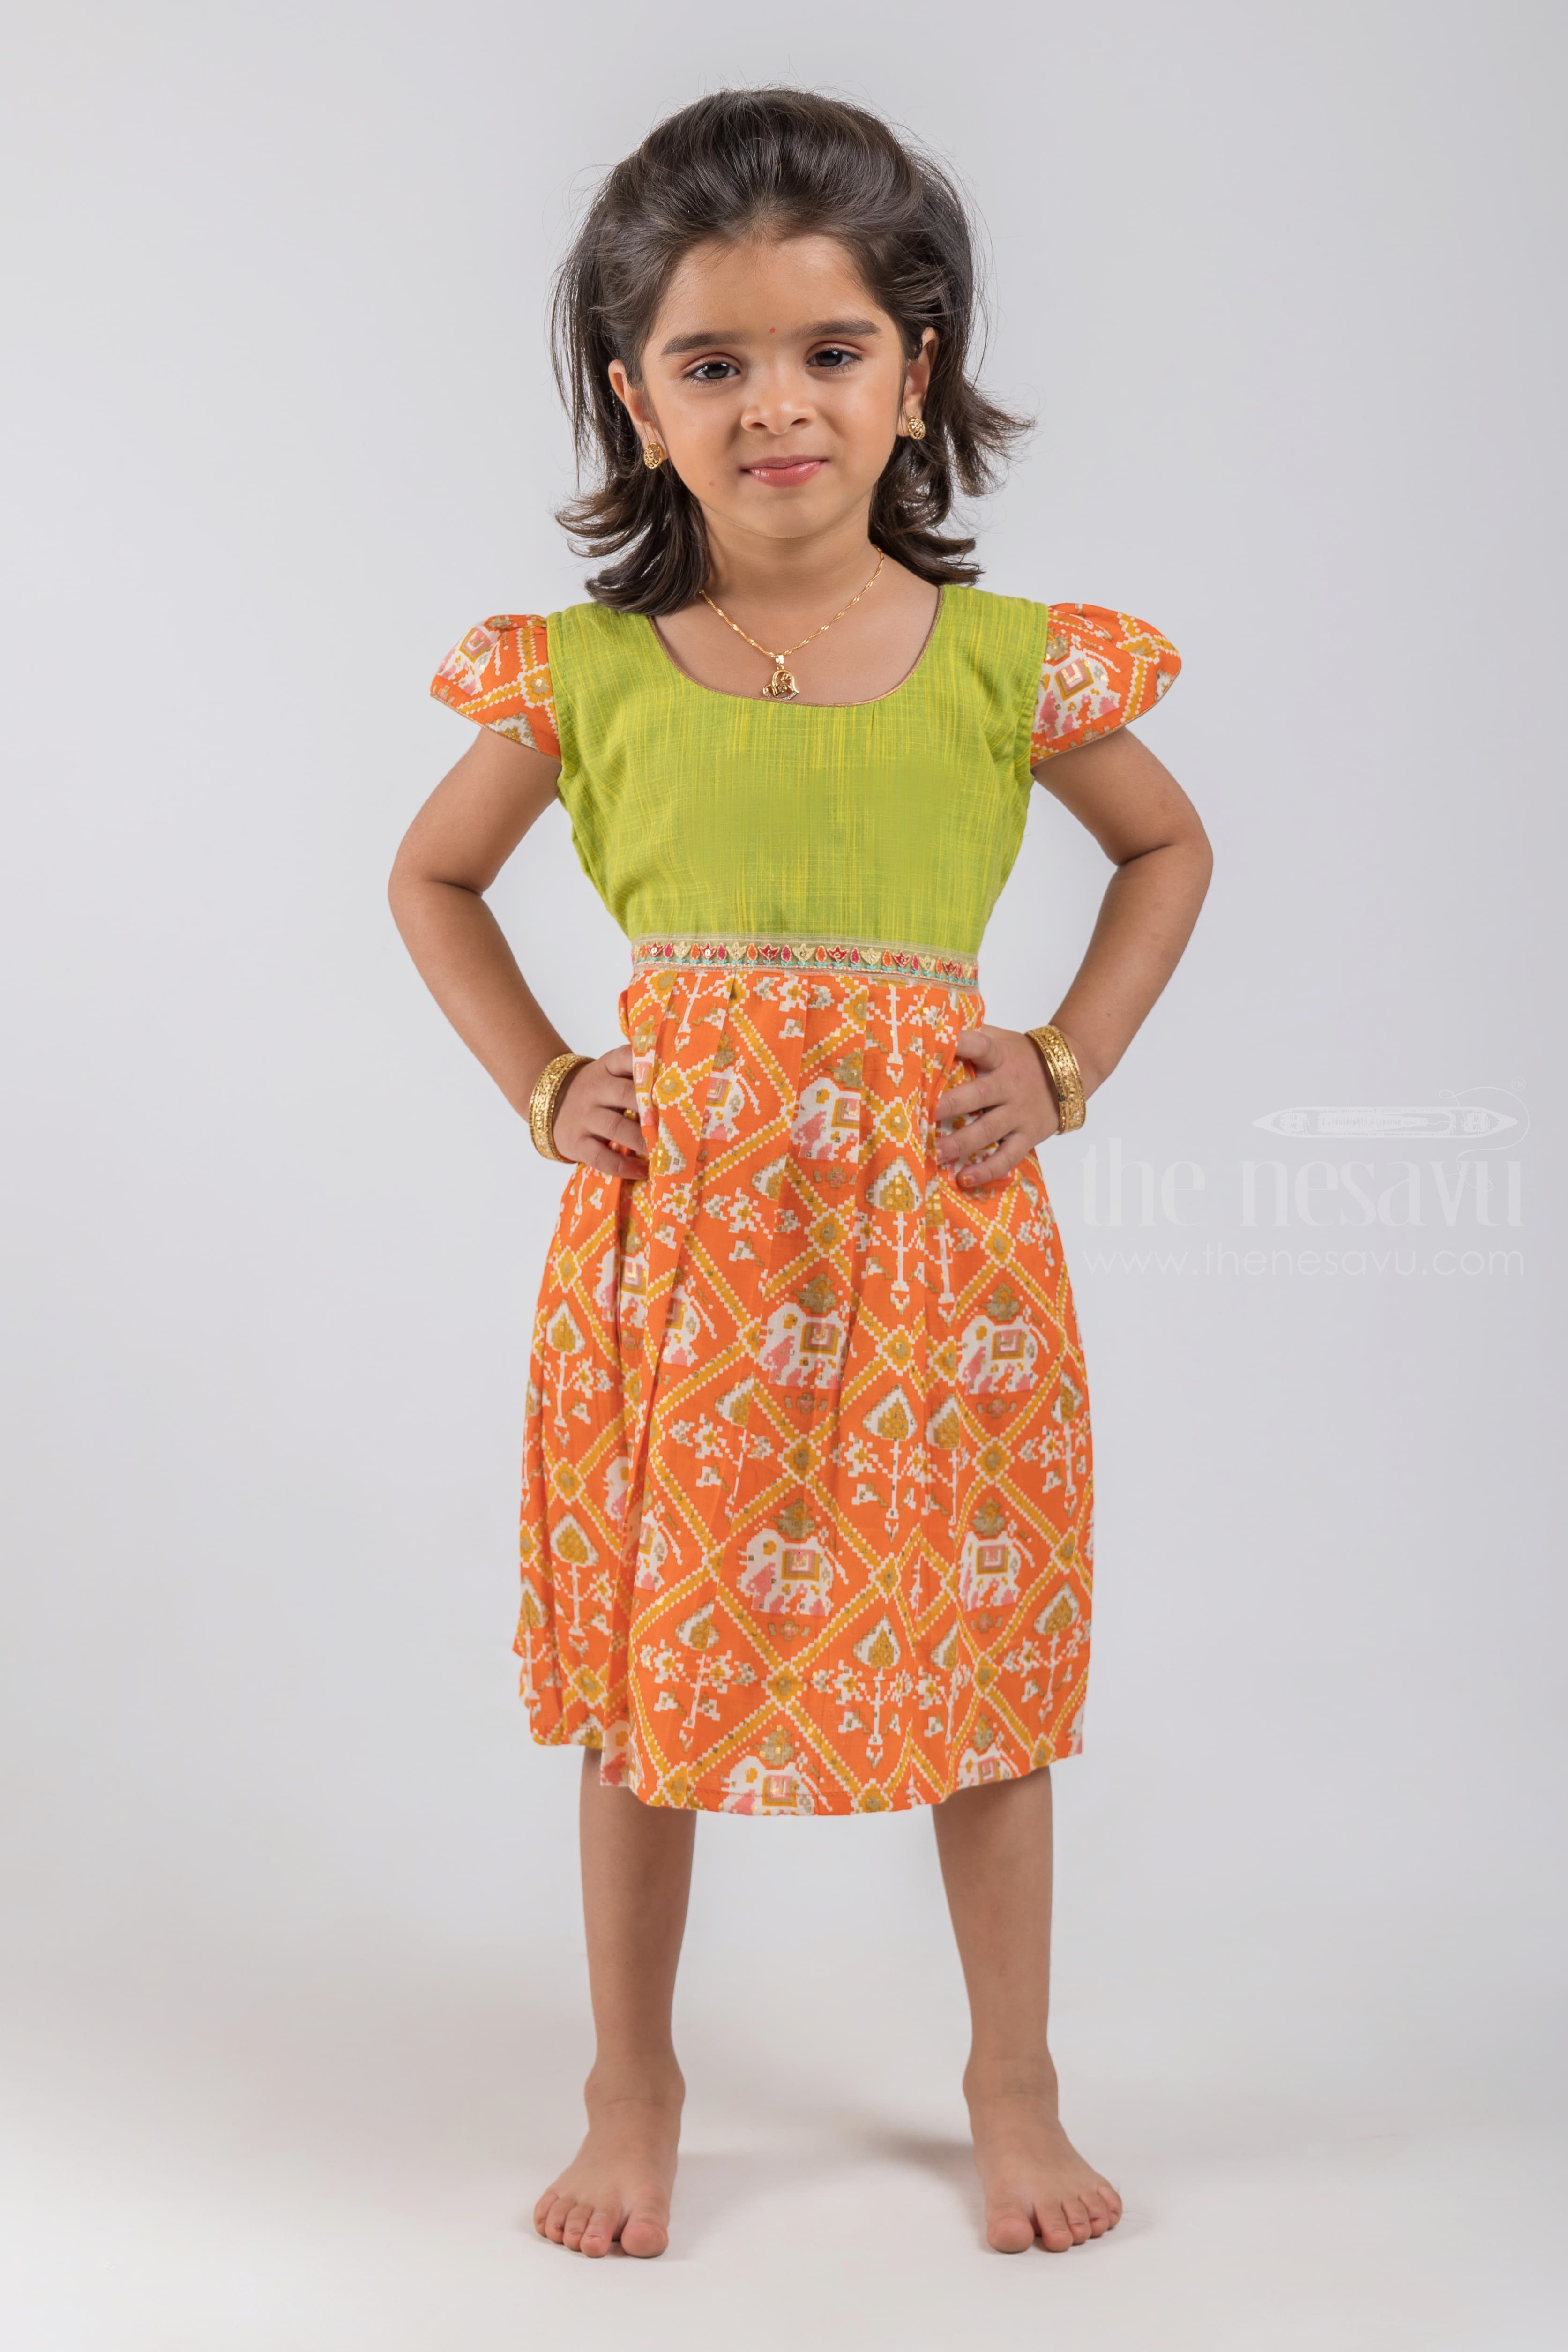 Buy Yellow Dresses  Frocks for Infants by BABY SAFE Online  Ajiocom